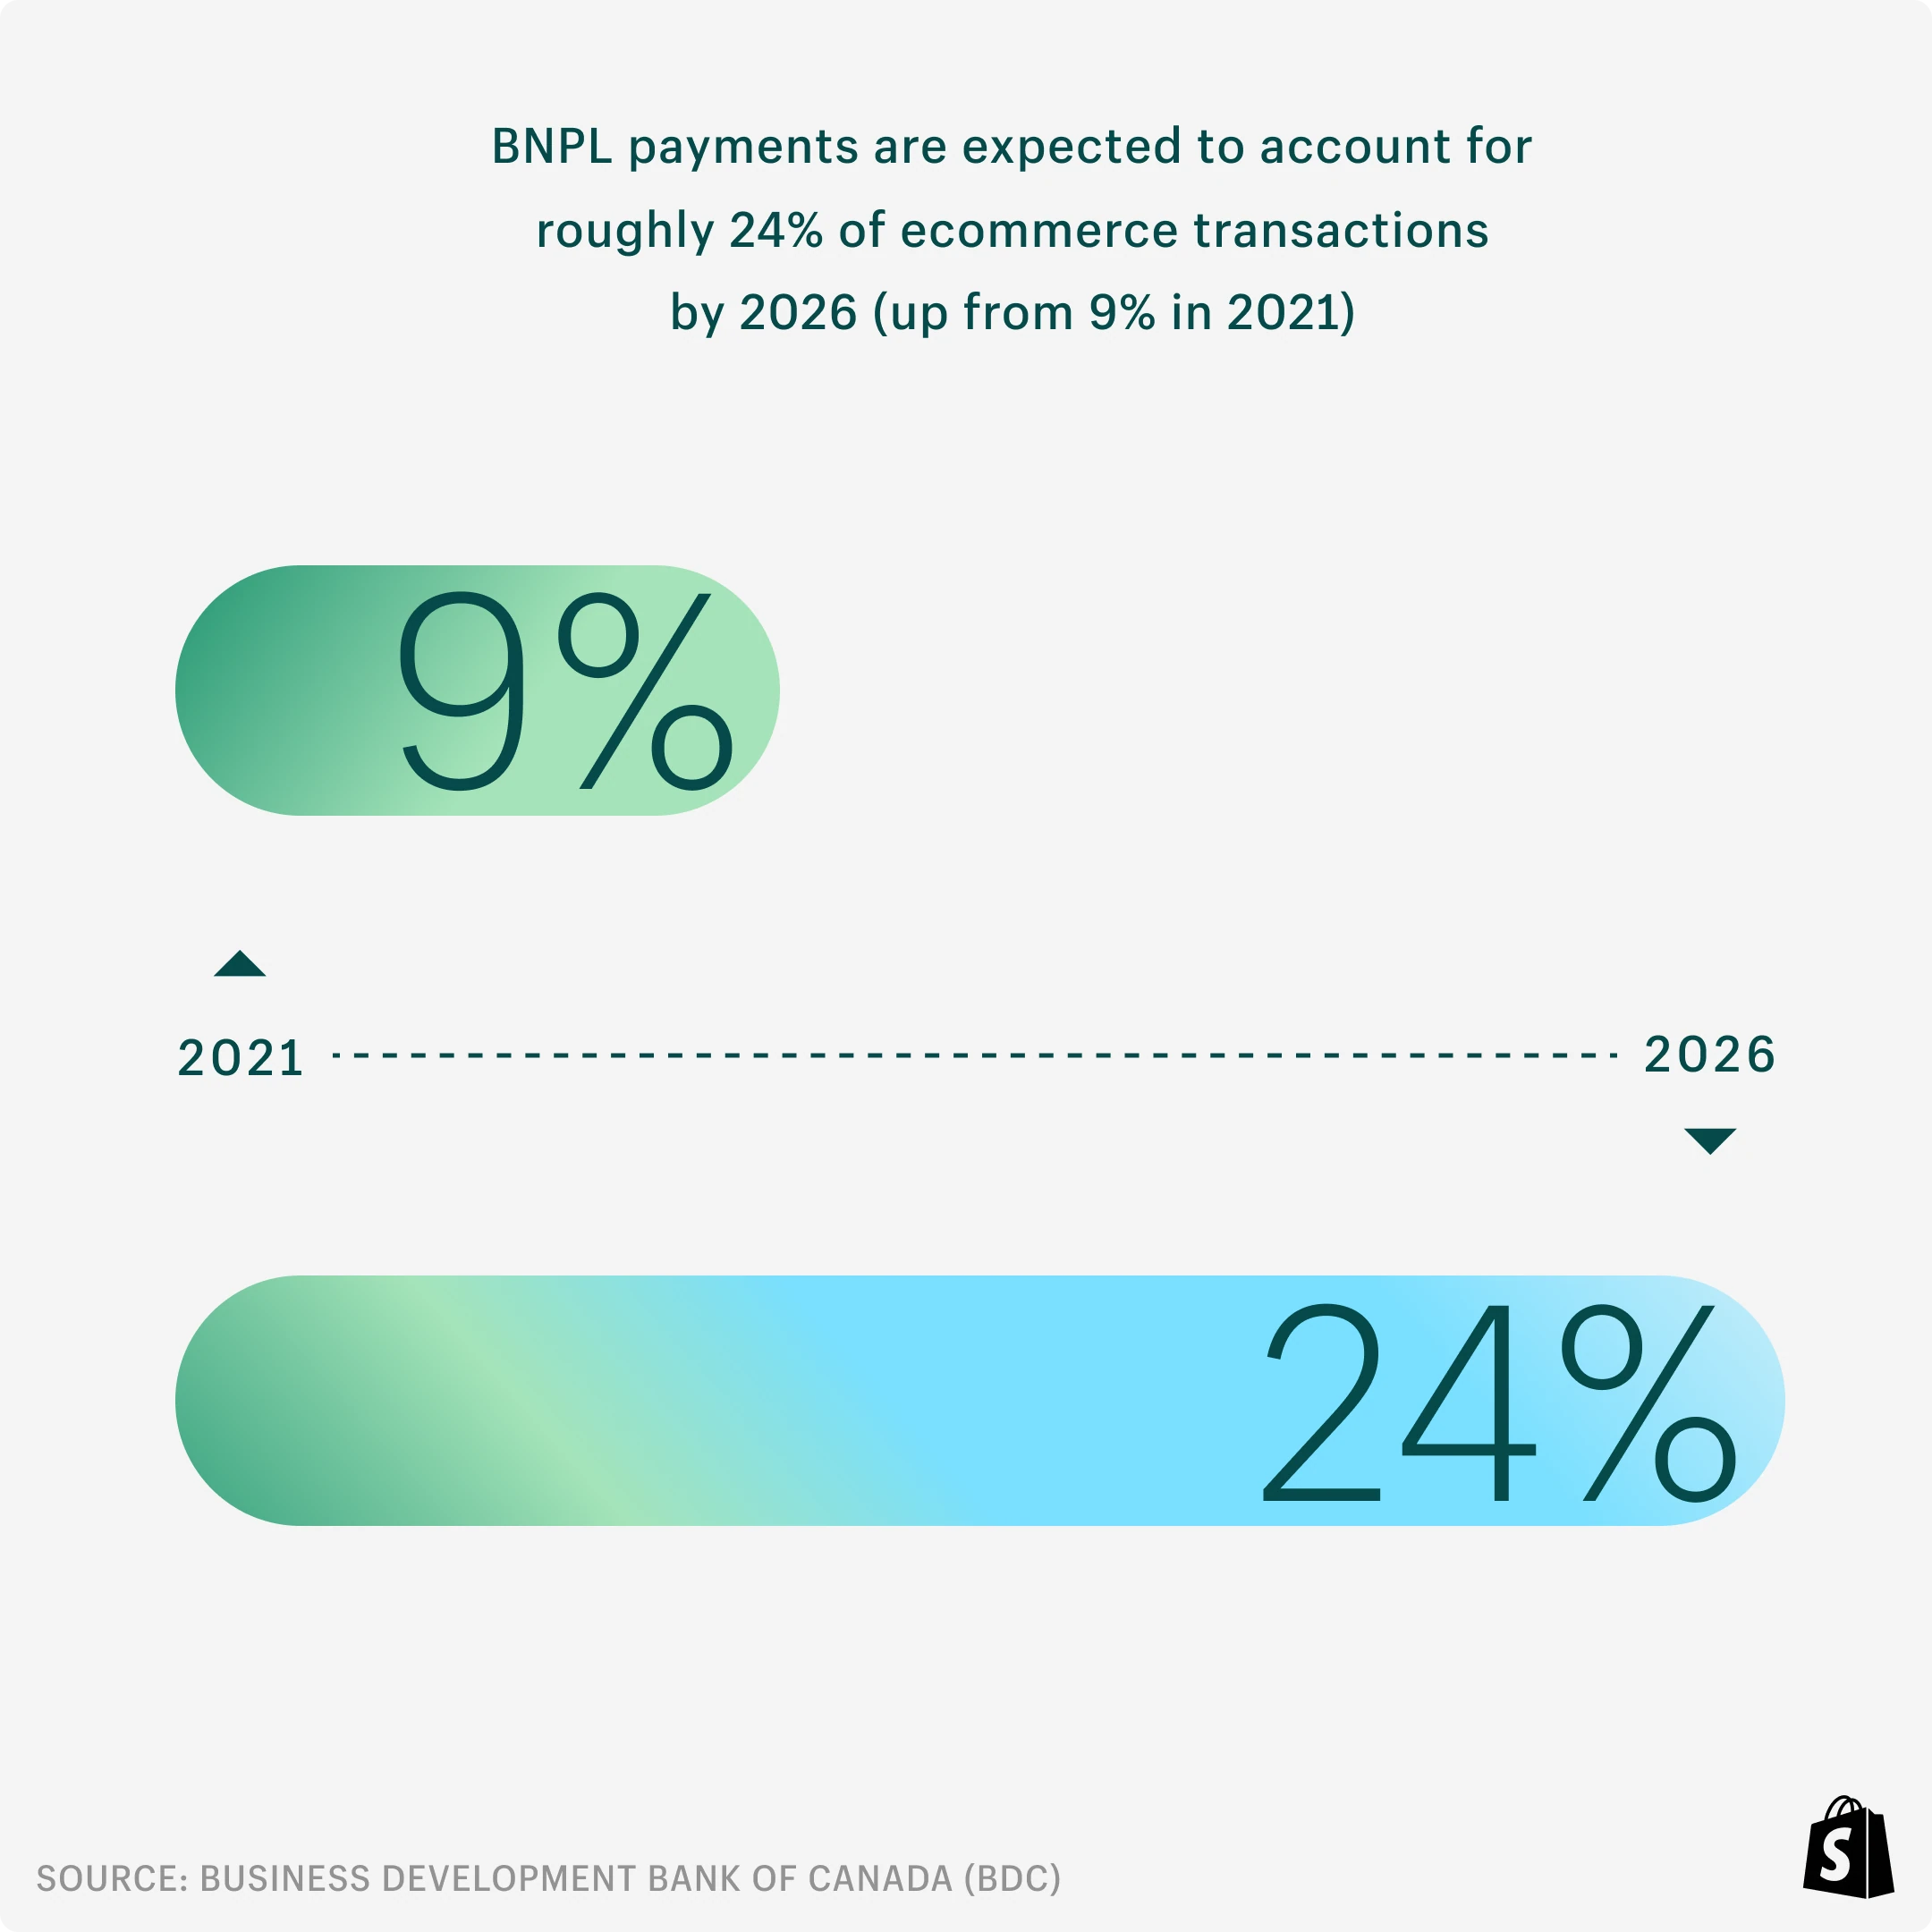 Graph showing BNPL payments are expected to account for roughly 24% of ecommerce transactions by 2026